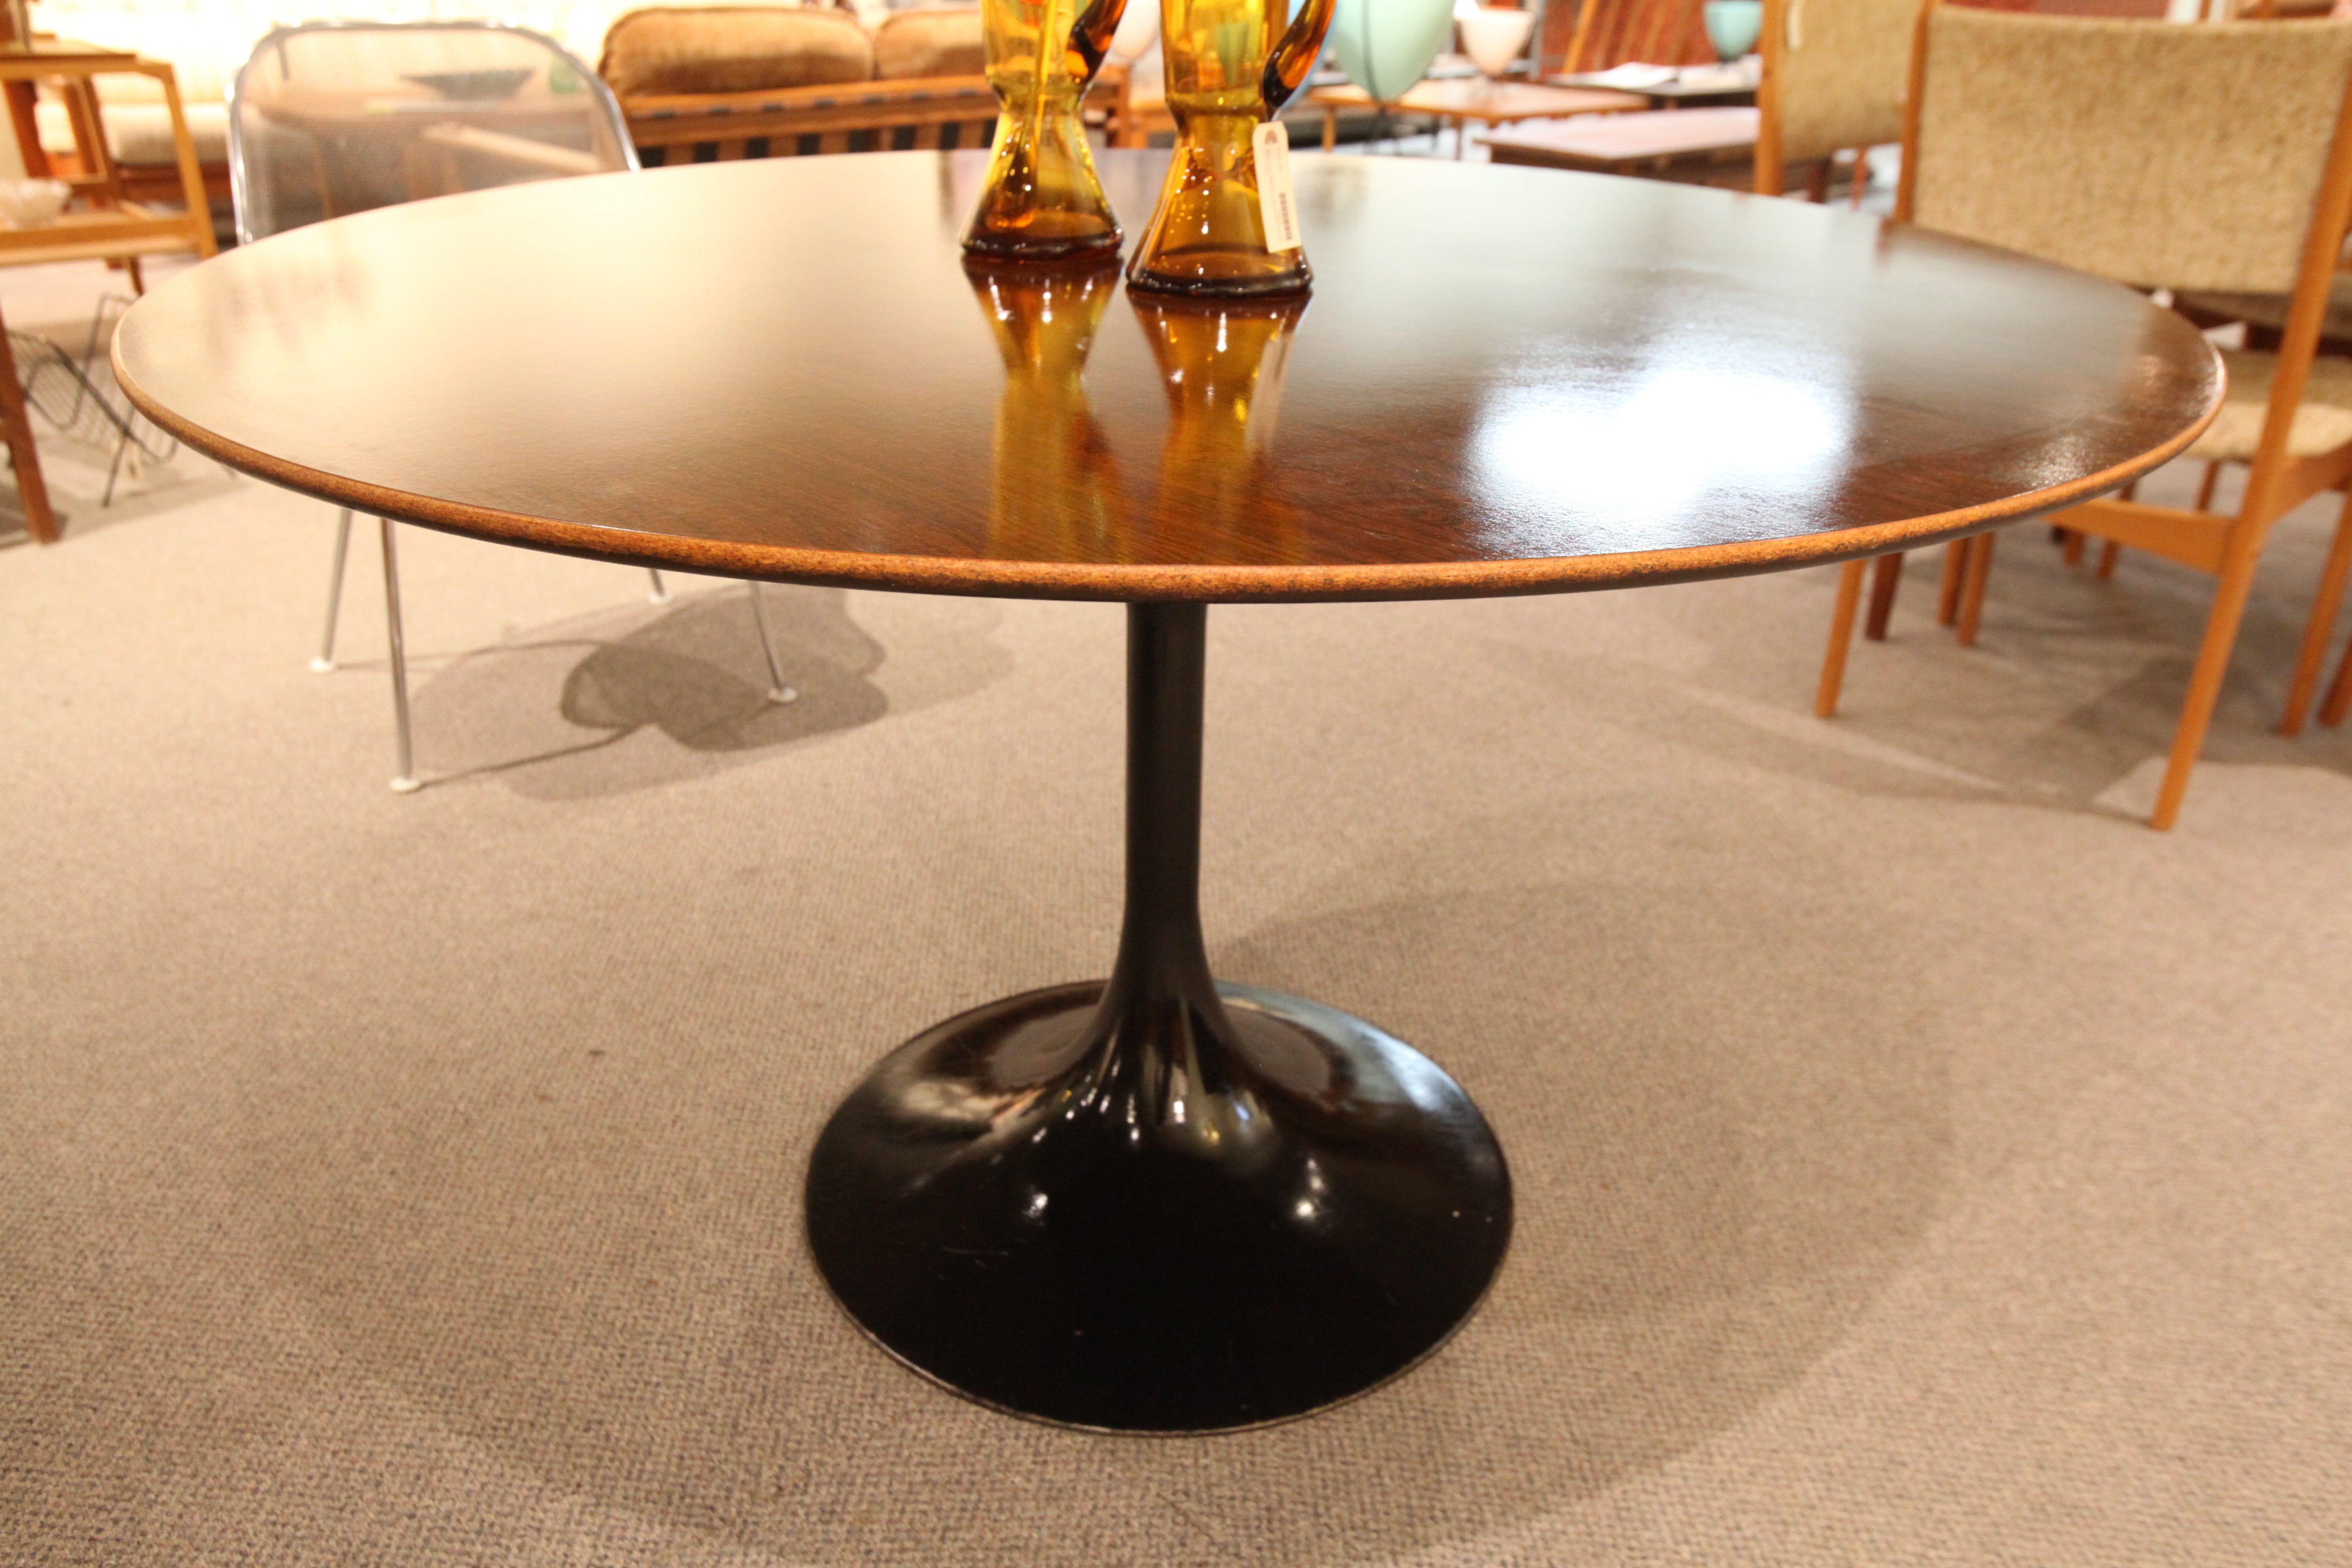 Vintage Tulip Table with Wood Grain Top (48" Round x 29"H)